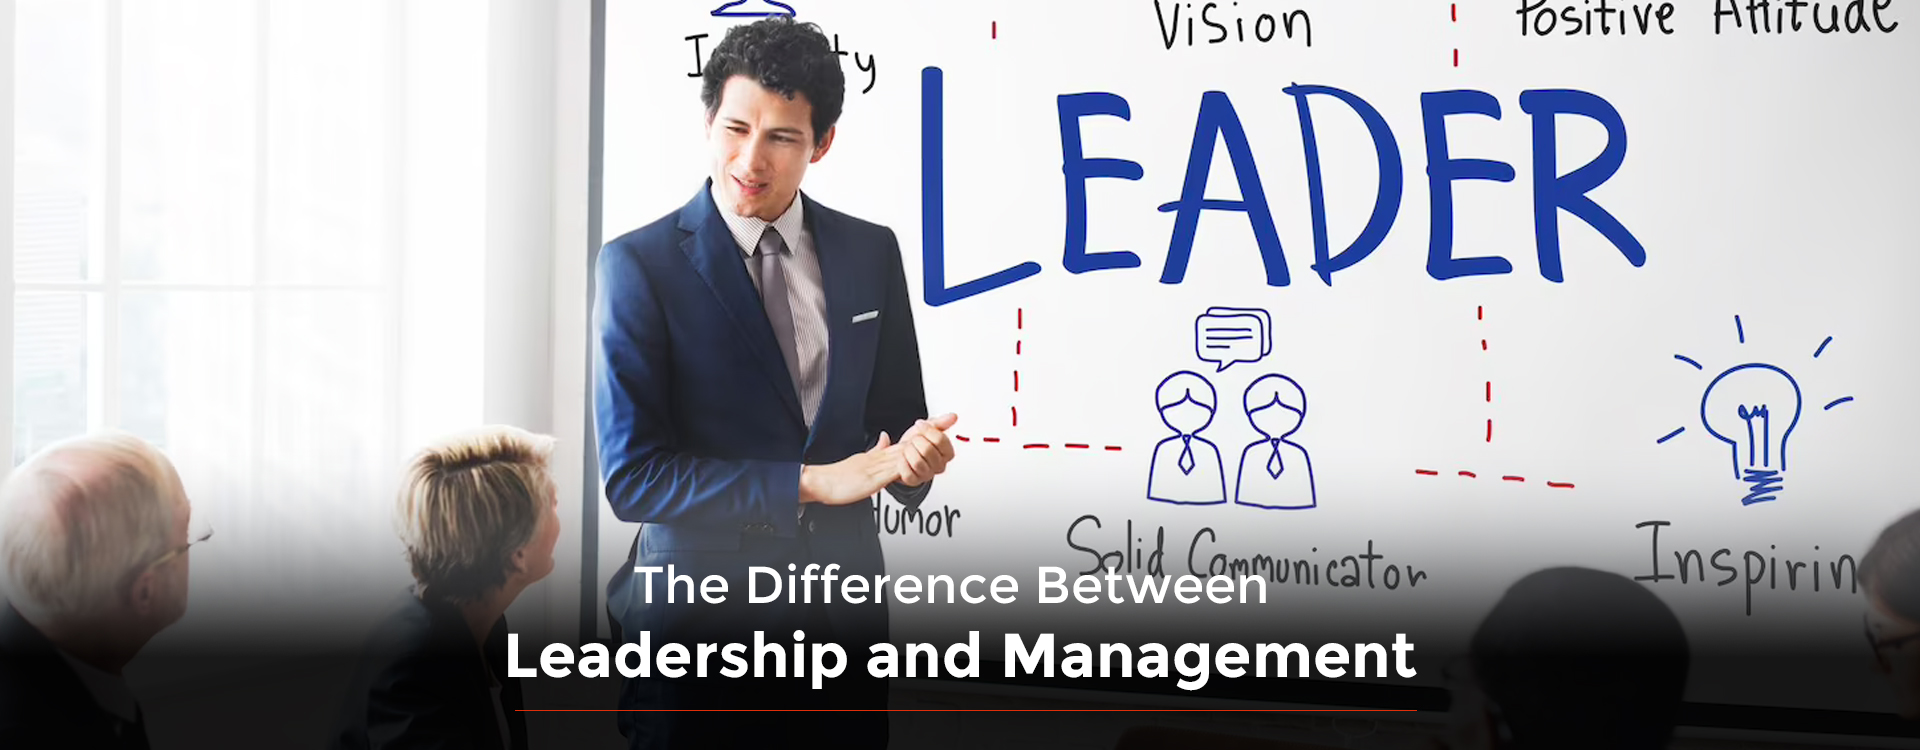 The Difference Between Leadership and Management